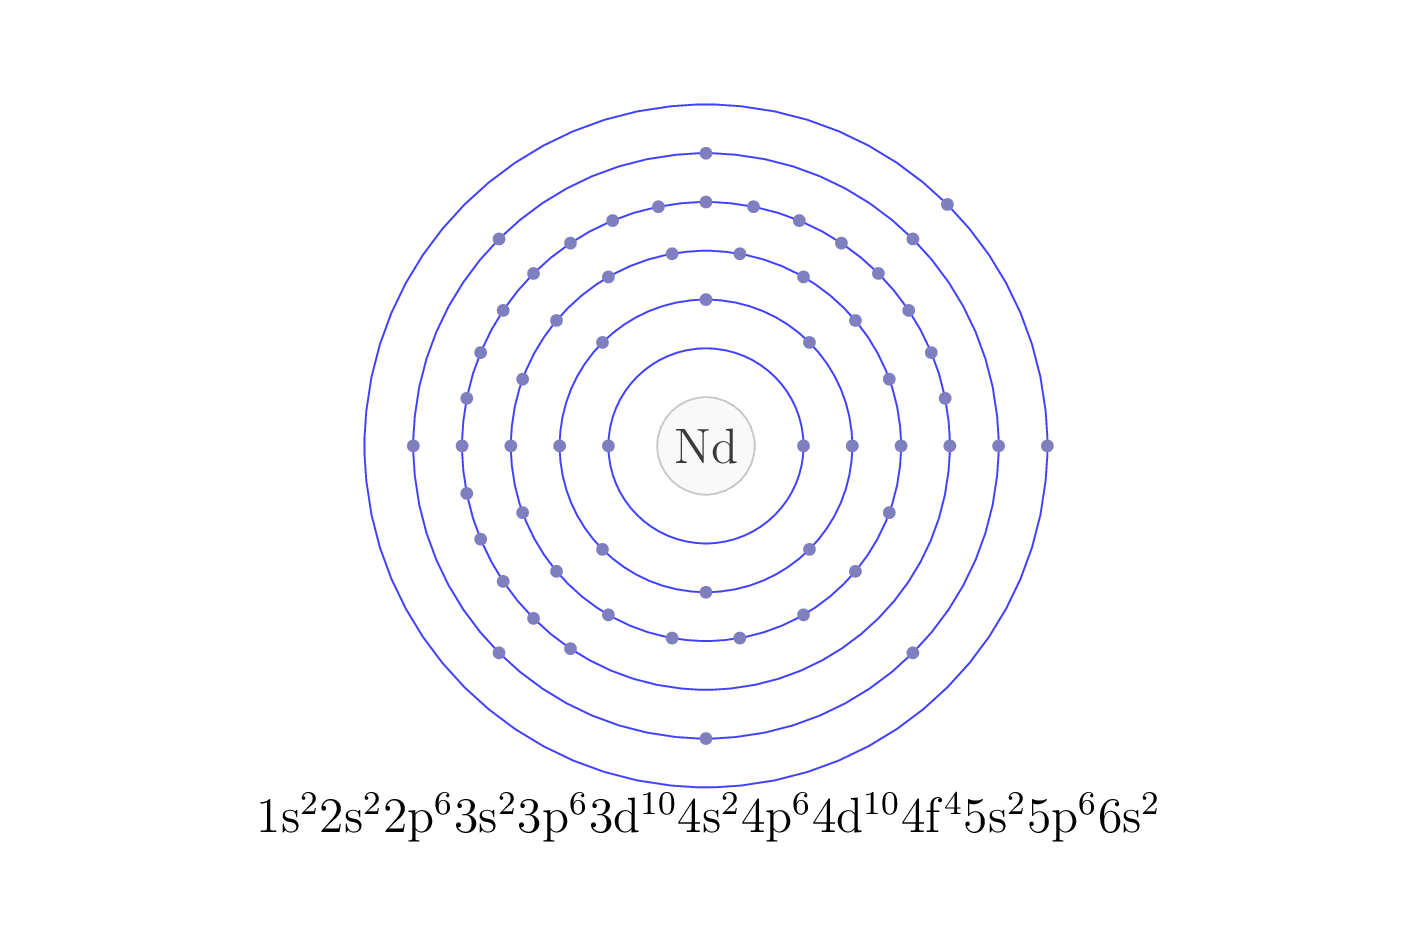 electron configuration of element Nd